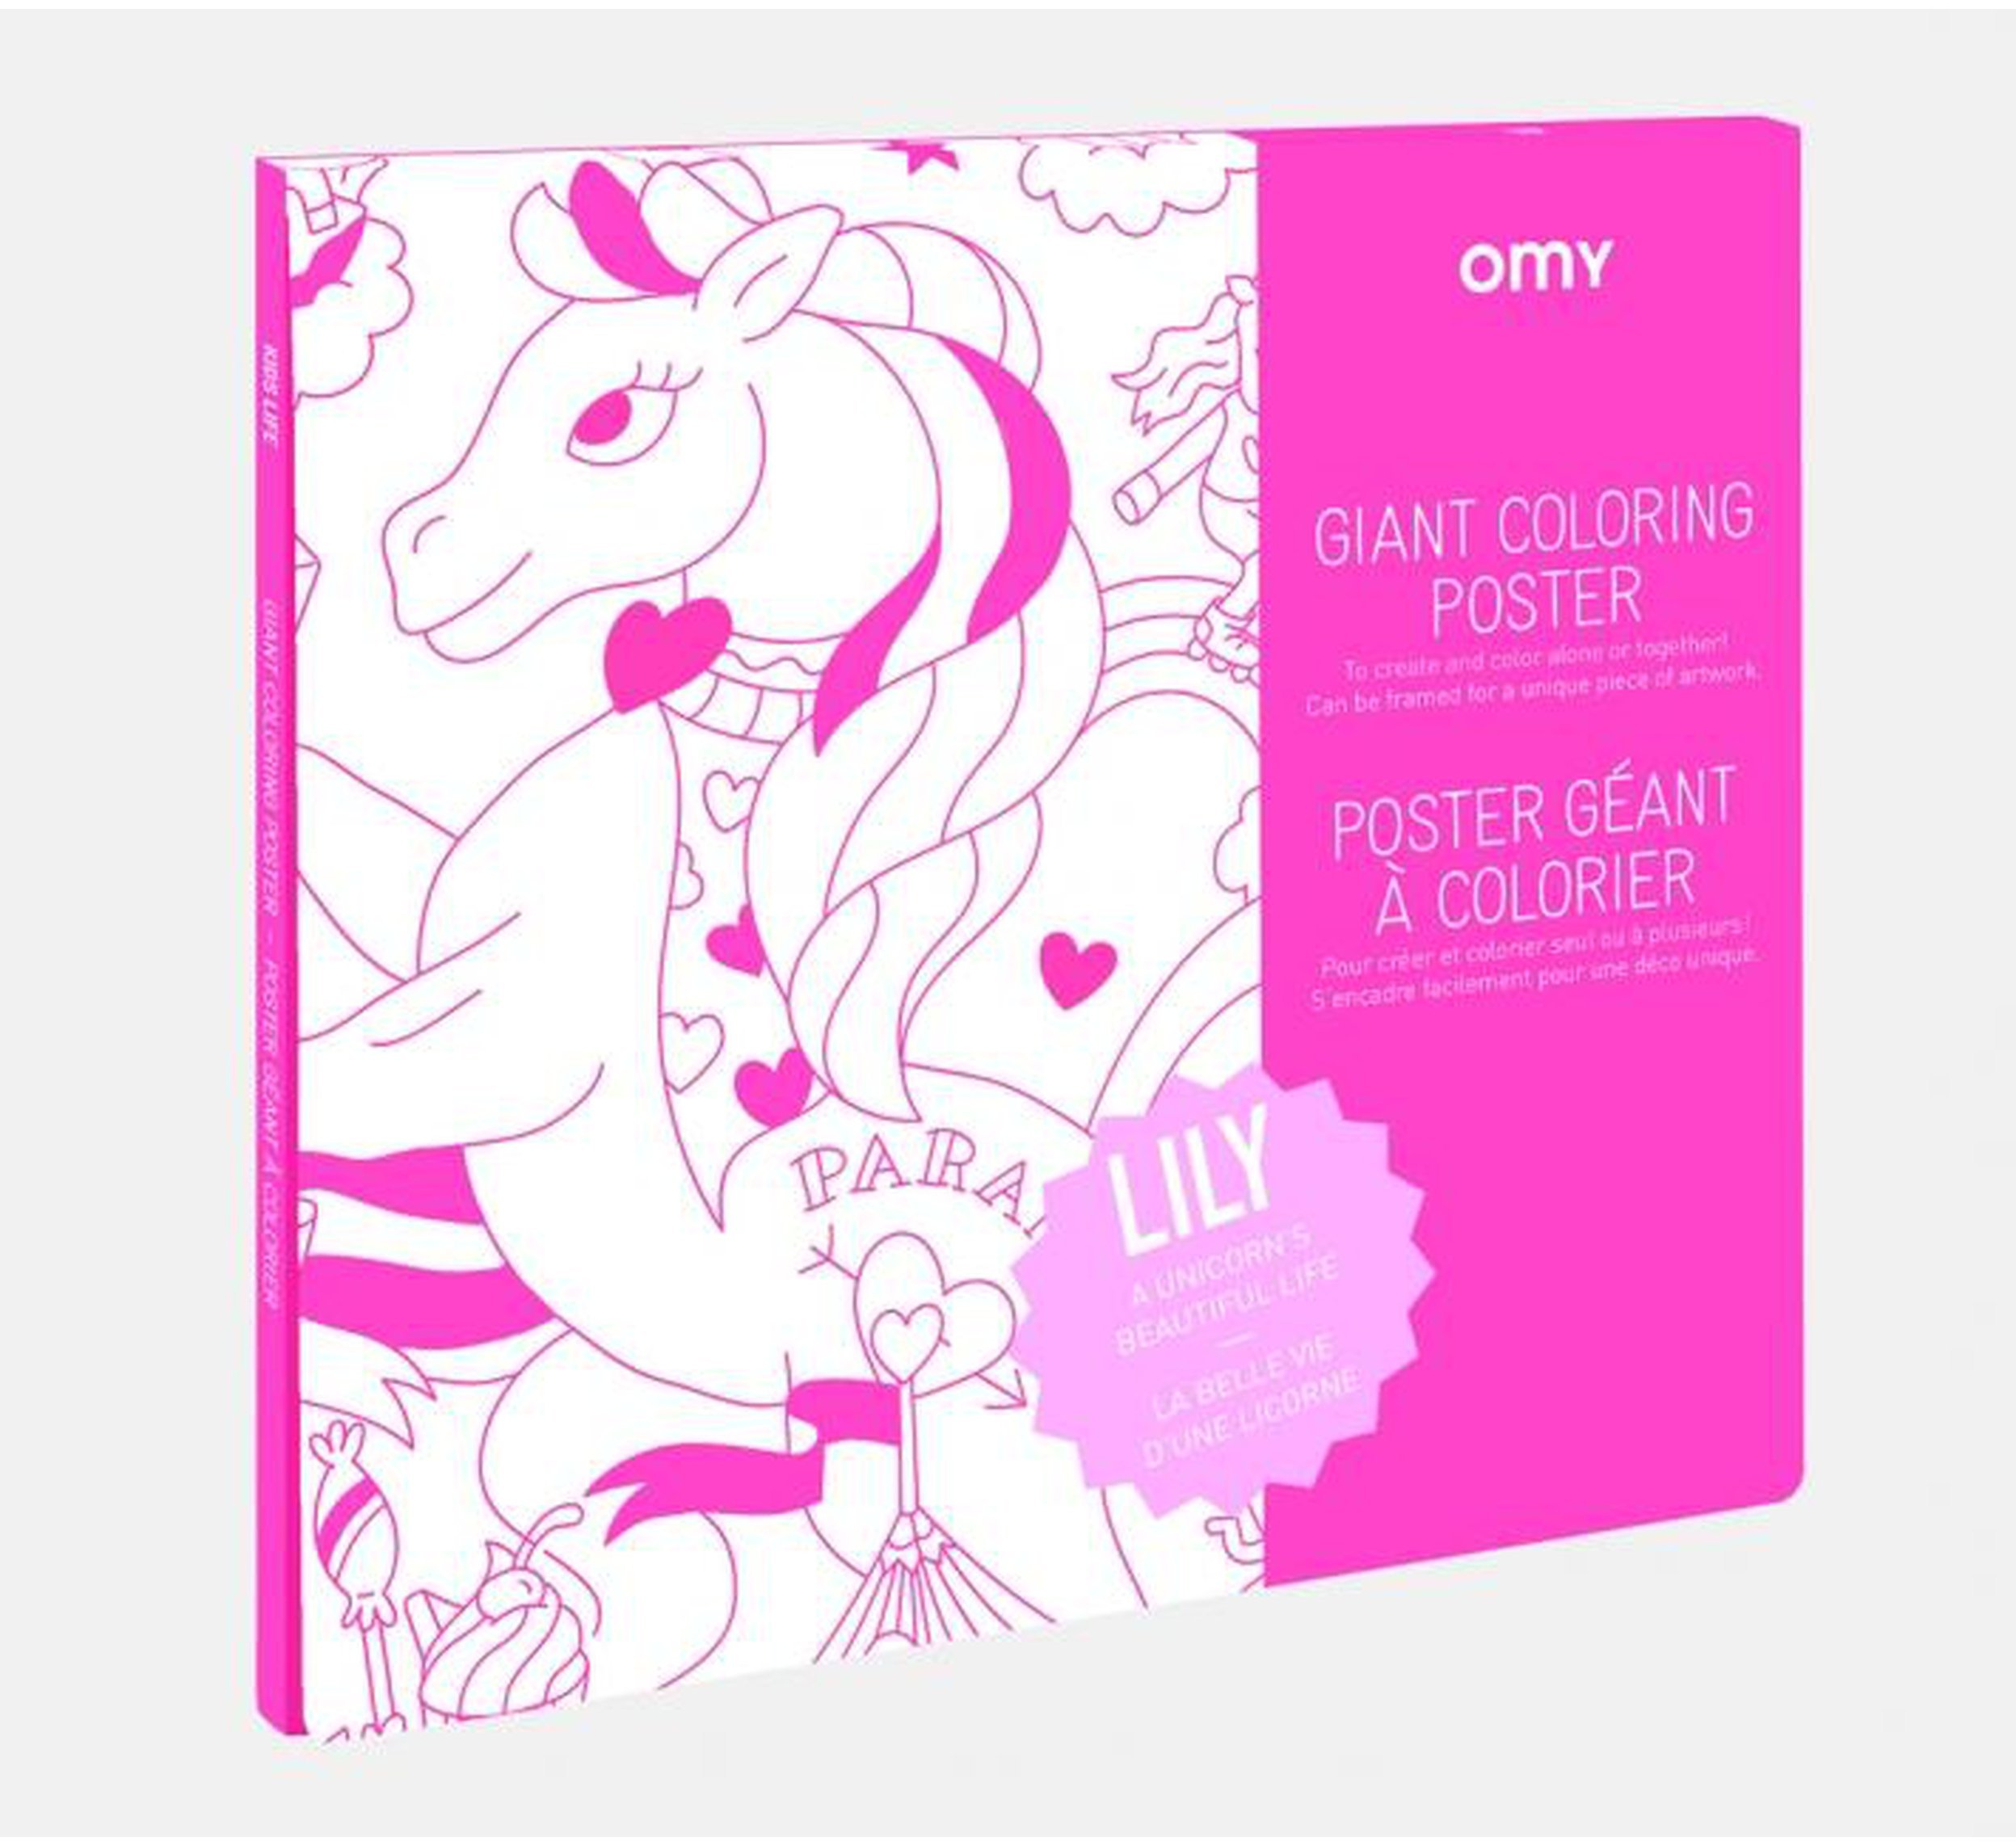 Coloring Poster - Lily-Coloring Poster-OMY-jellyfishkids.com.cy